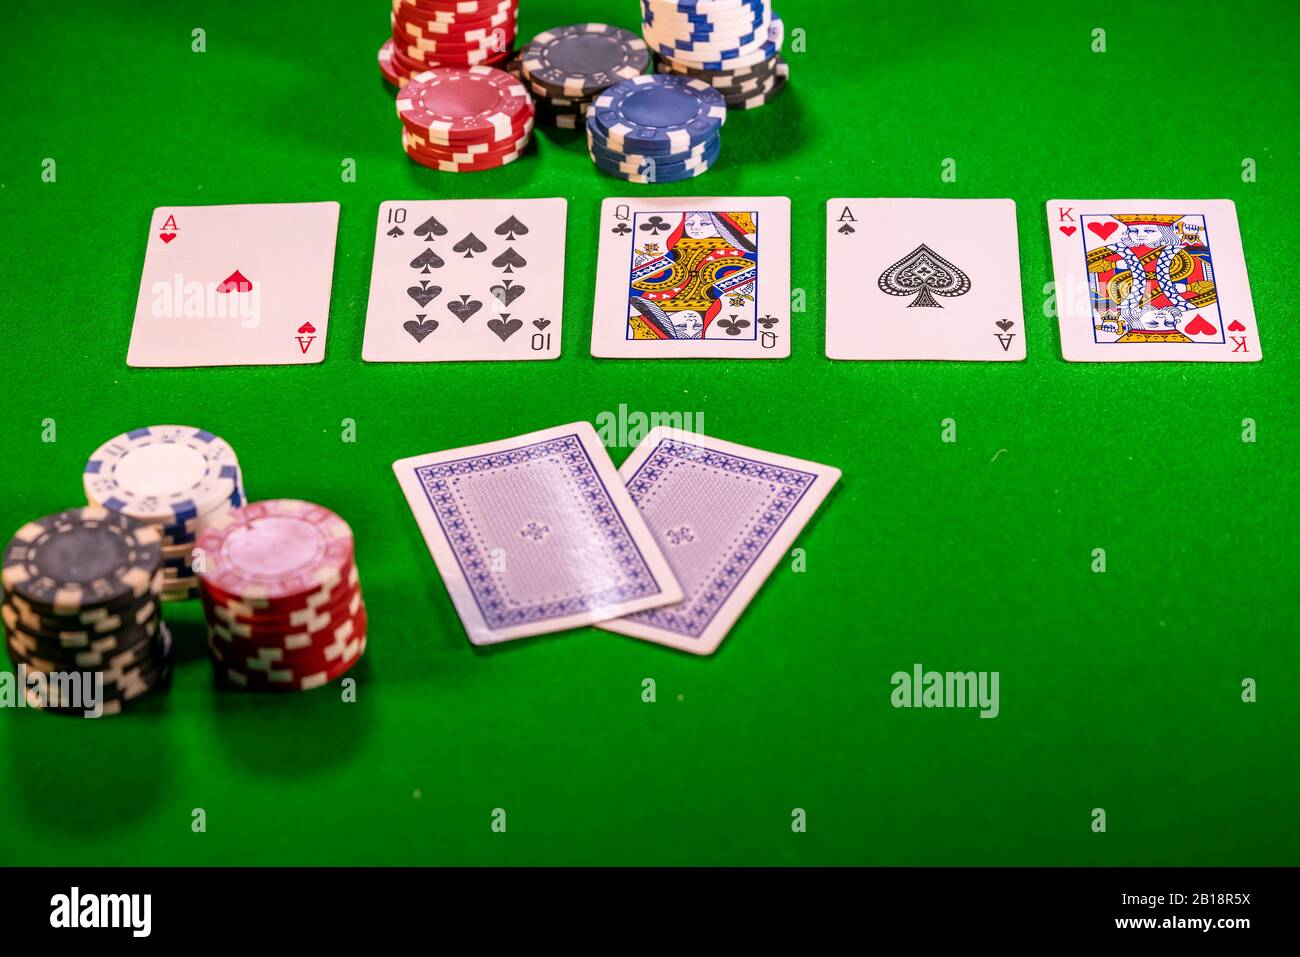 16 The River (fifth street) in a game of Texas Holdem poker Stock Photo -  Alamy